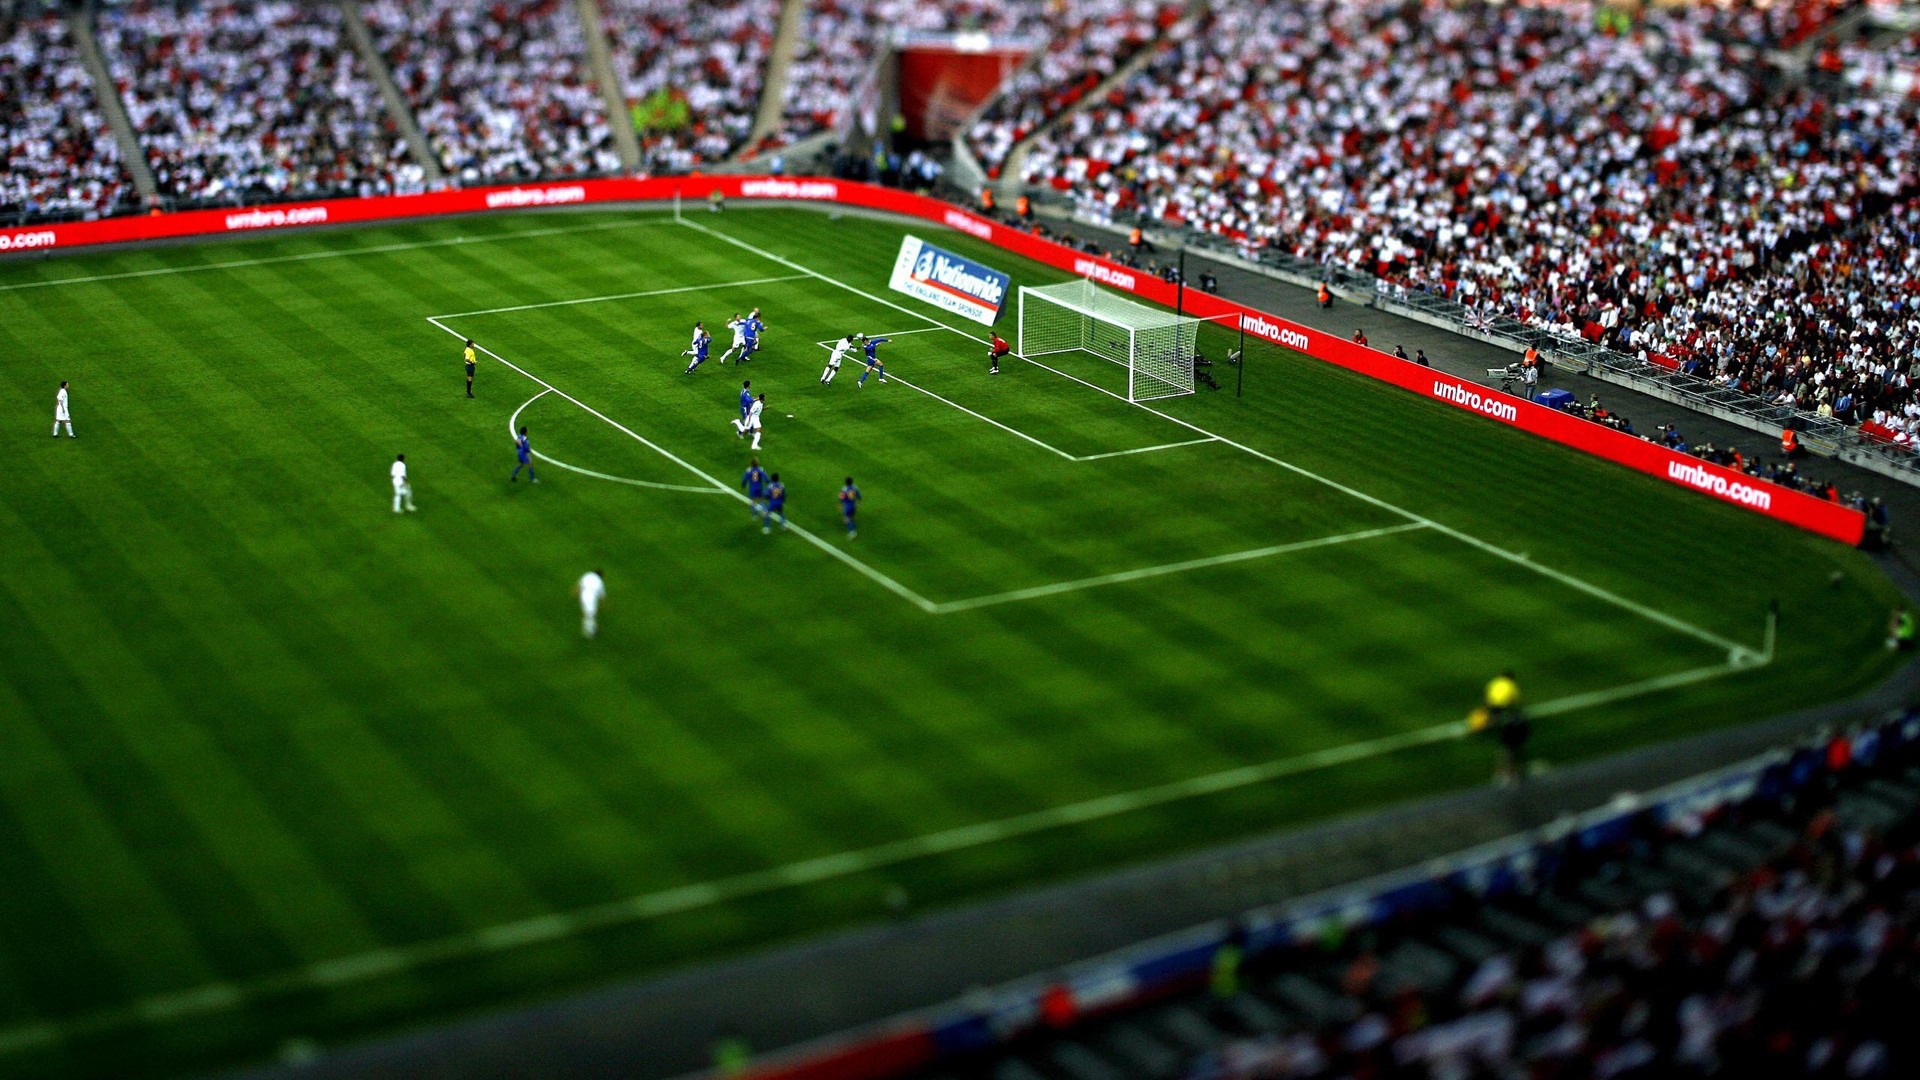 Stadium Toy Effect for 1920 x 1080 HDTV 1080p resolution